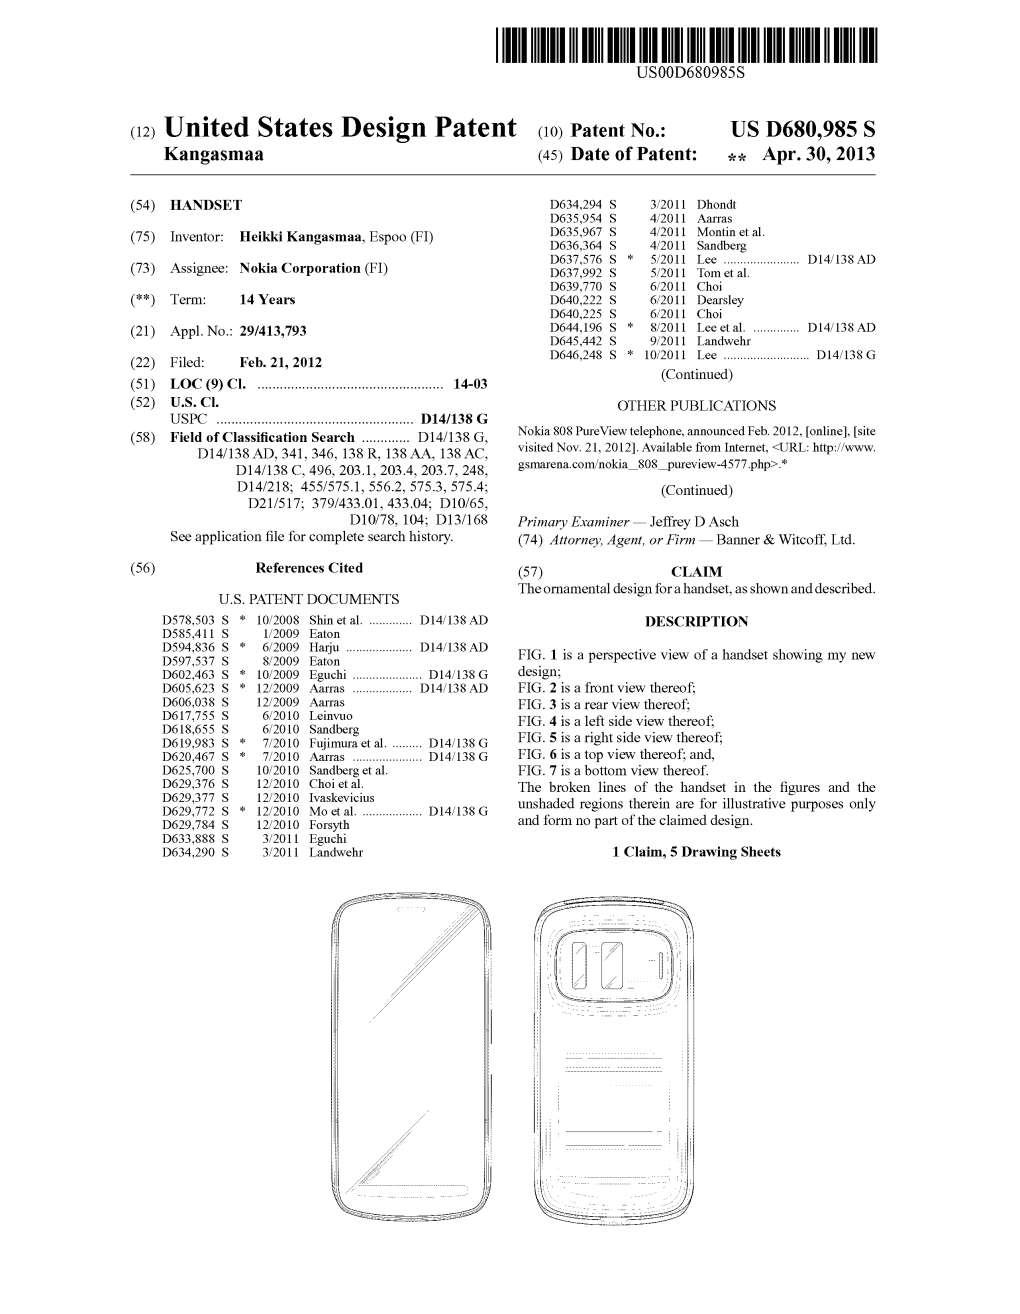 (12) United States Design Patent (10) Patent No.: US D680,985 S Kangasmaa (45) Date of Patent: Apr